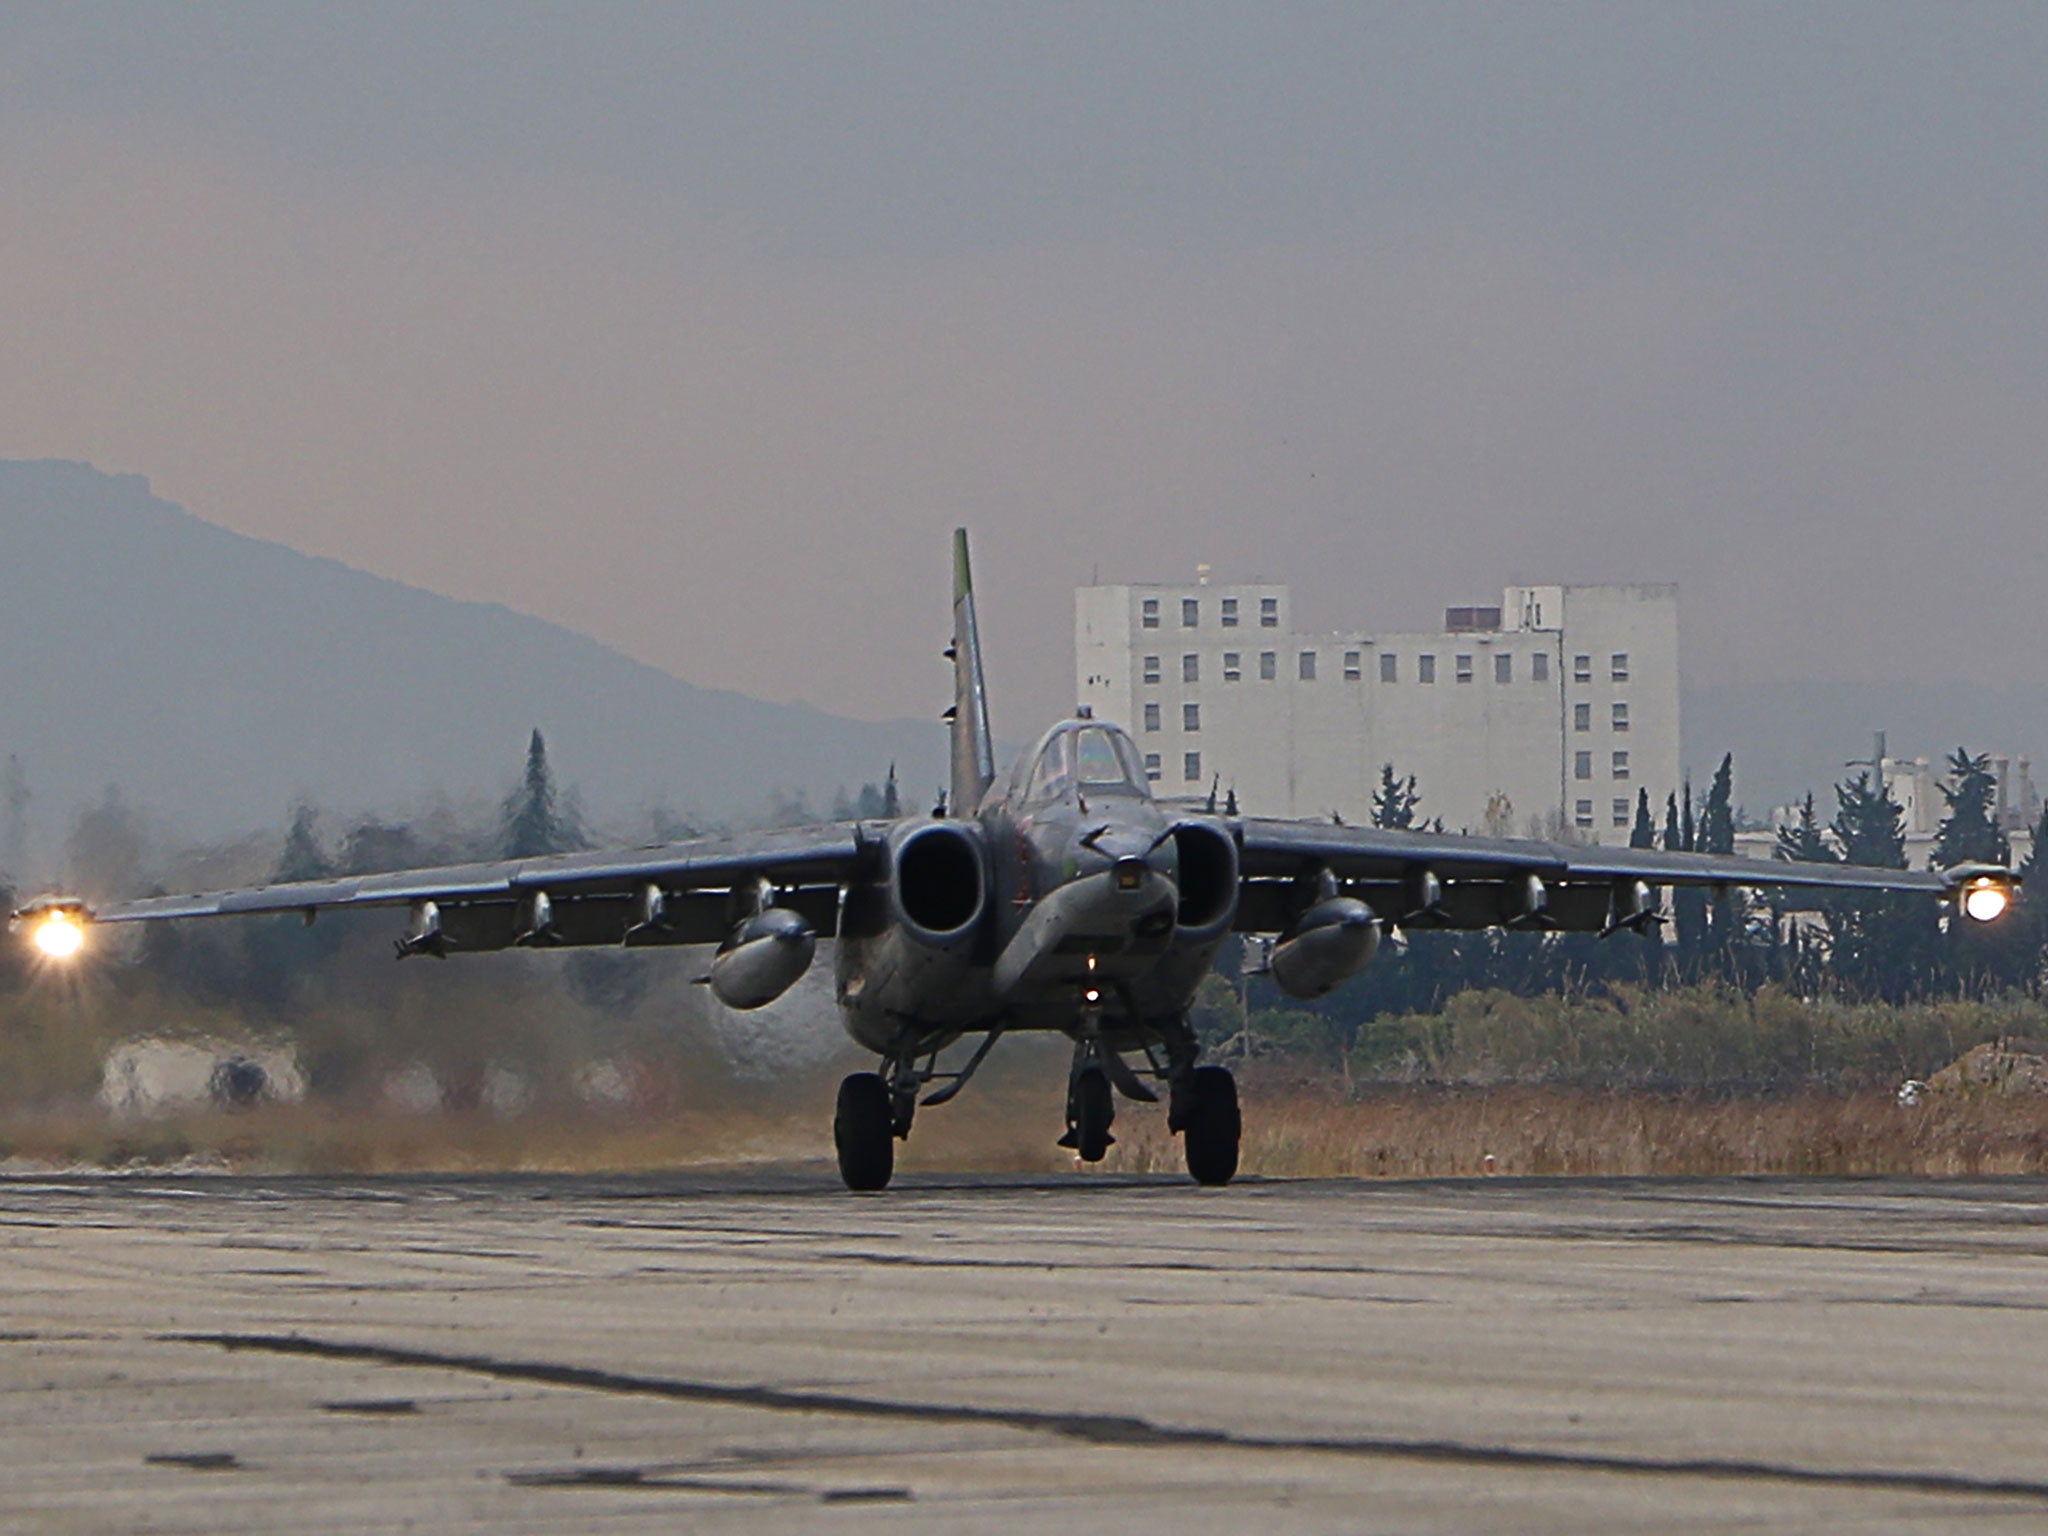 A Russian Sukhoi Su-34 bomber lands at the Russian Hmeimim military base in Latakia province, in the northwest of Syria, on 16 December, 2015